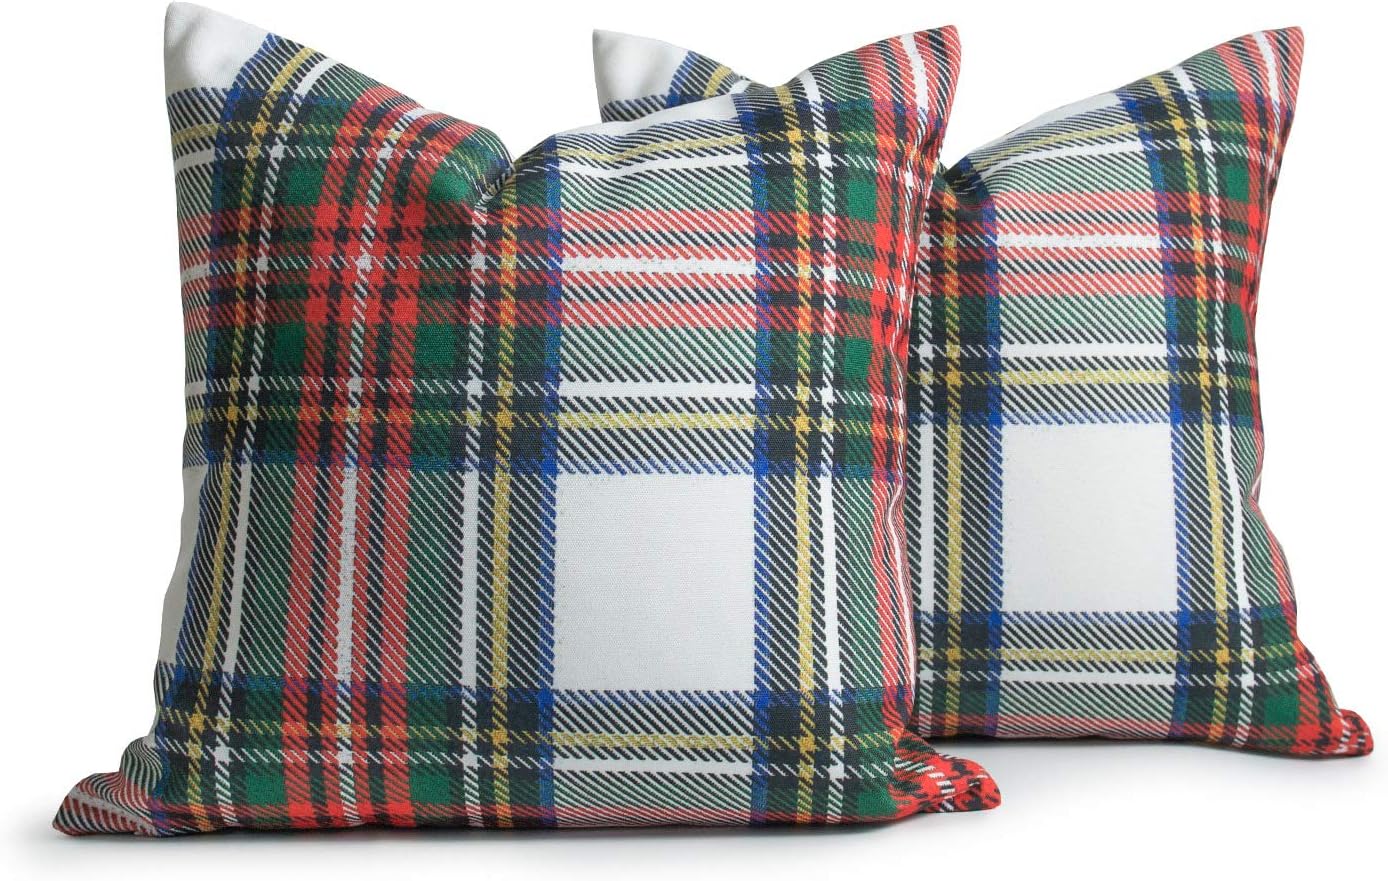 Decorative Throw Pillow COVERS, Gray Classic Stewart Scottish Tartan Plaid (Canvas), 18"x18", Set of 2 (inserts not included)